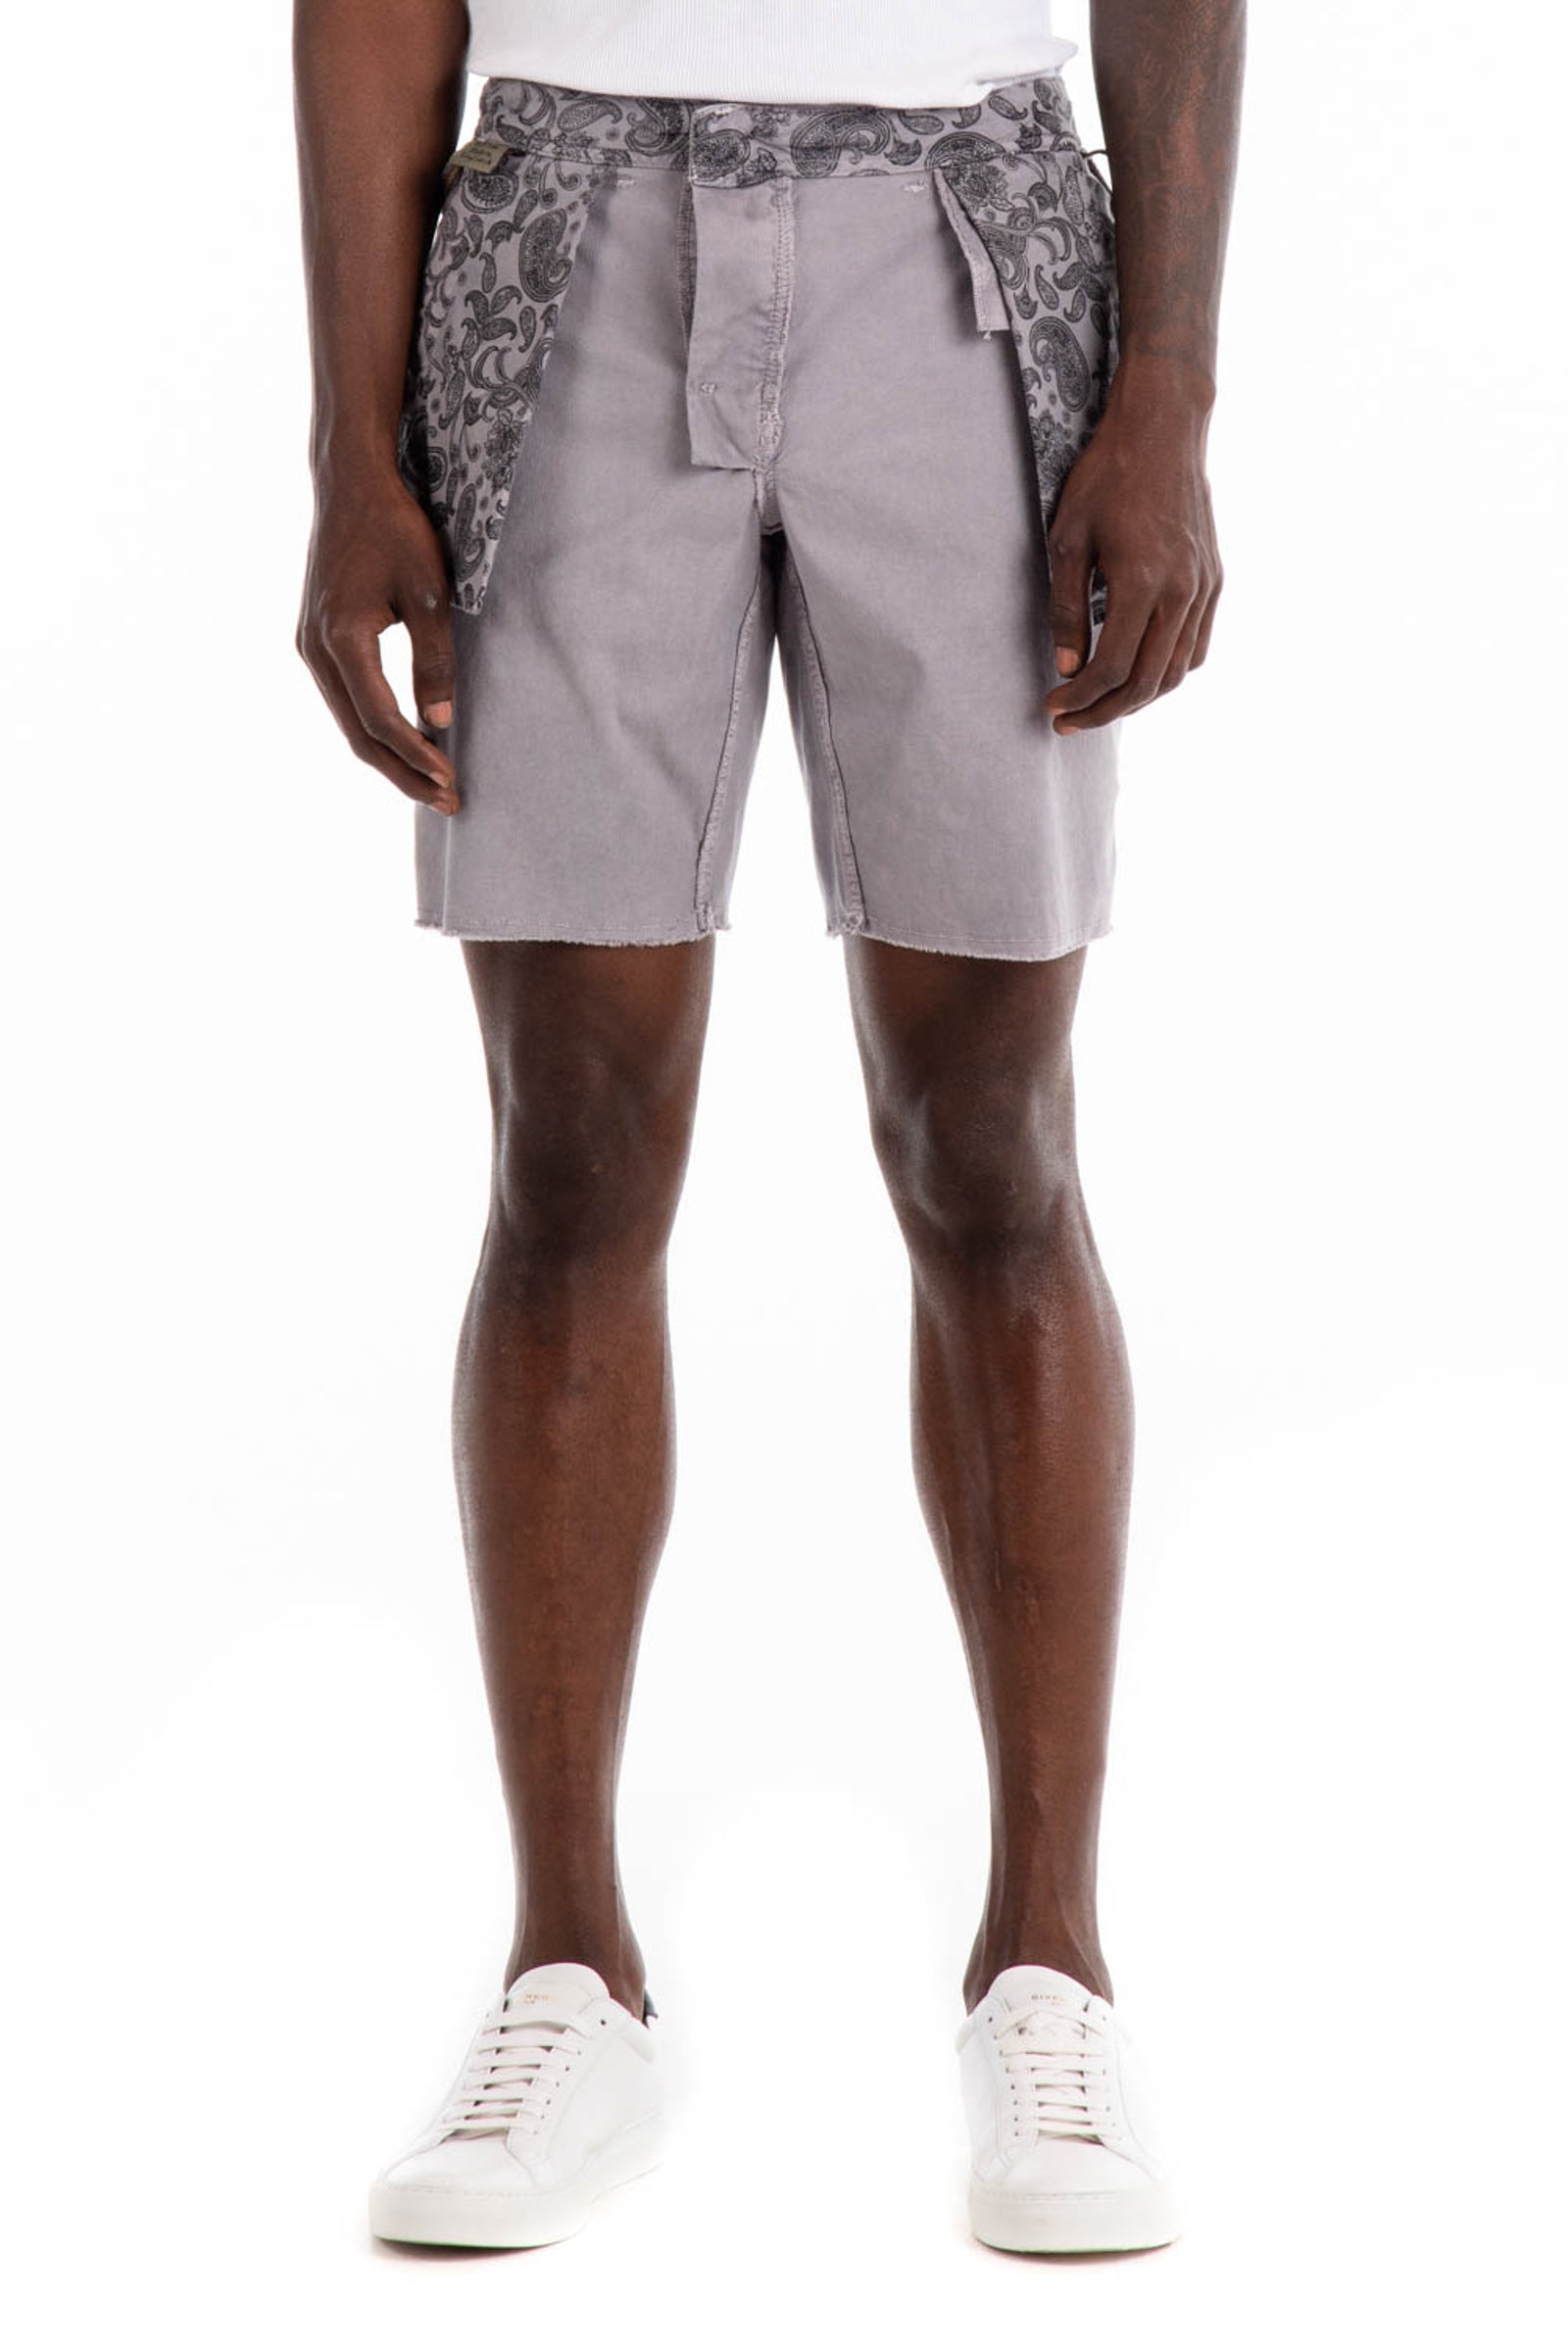 Original Paperbacks Brentwood Chino Short in Light Grey on Model Cropped Inside Out Pocket Front View